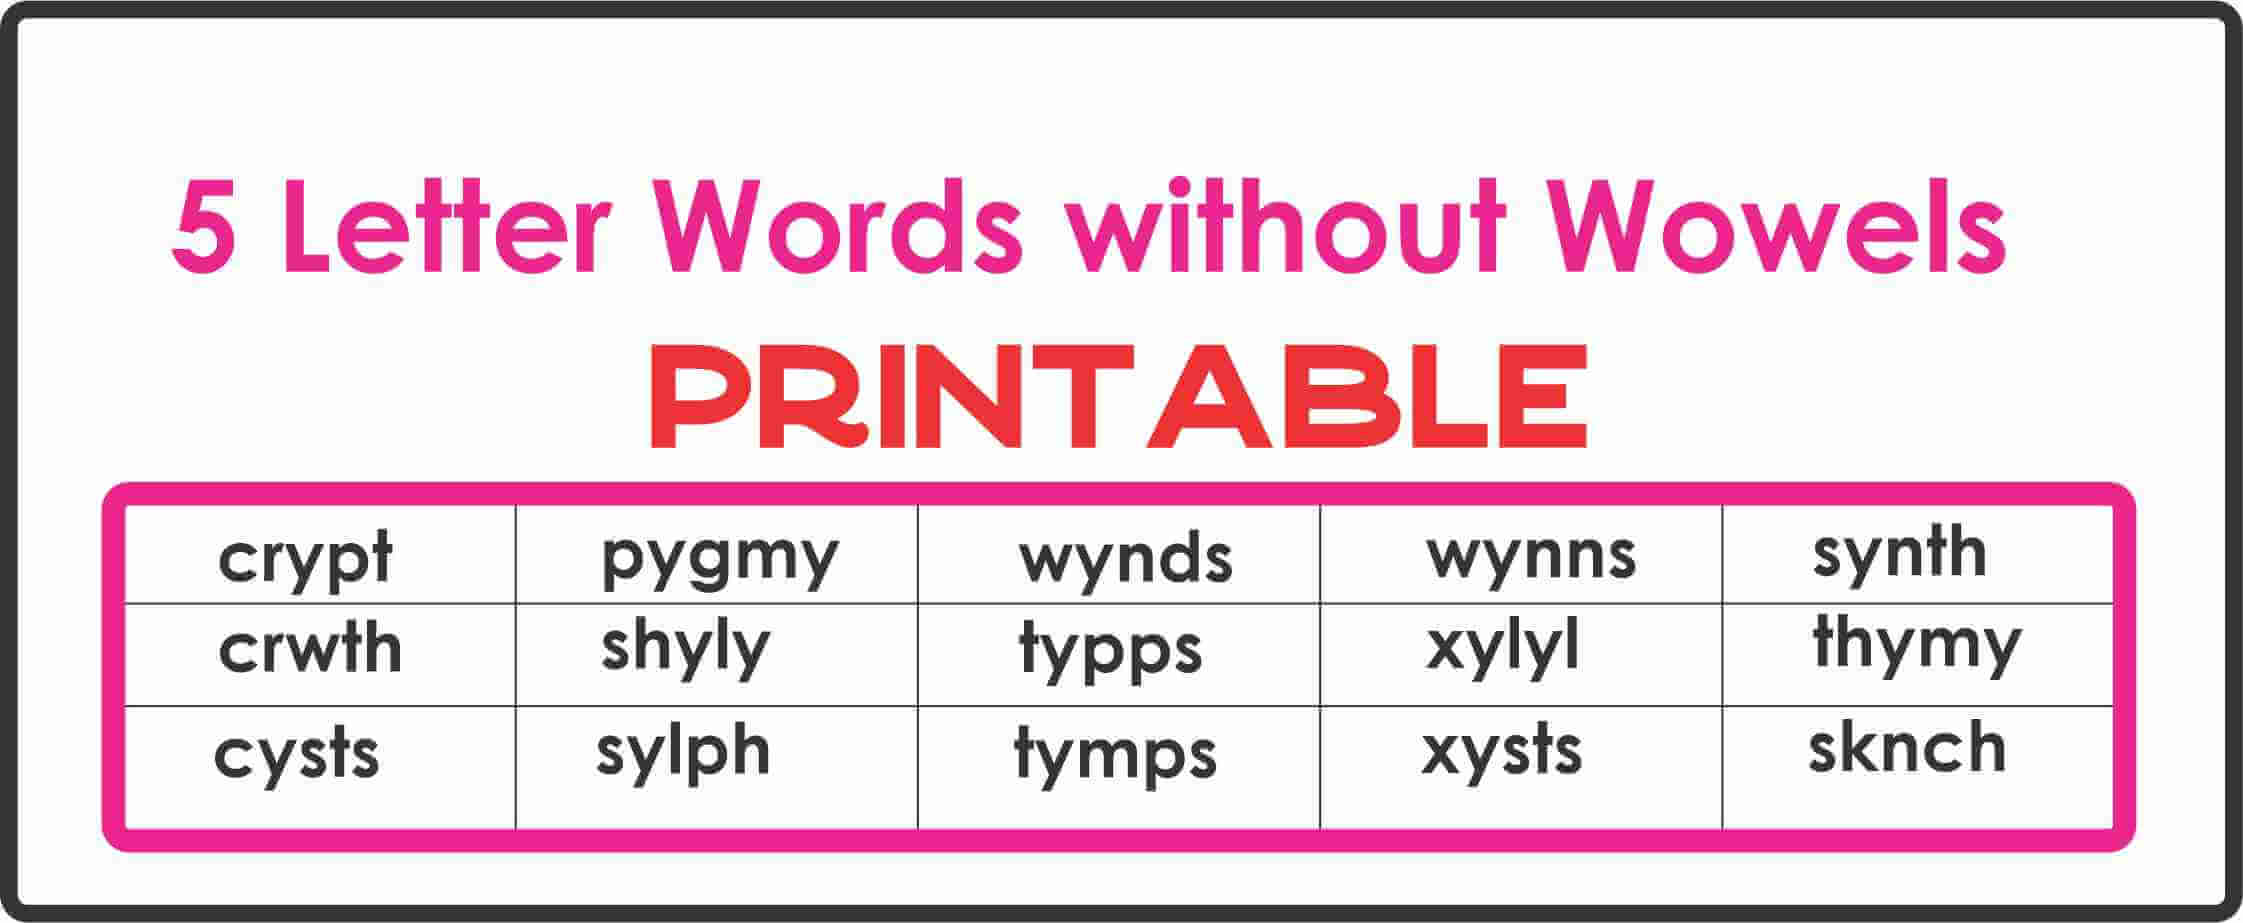 5 Letter Words without Vowels Printable